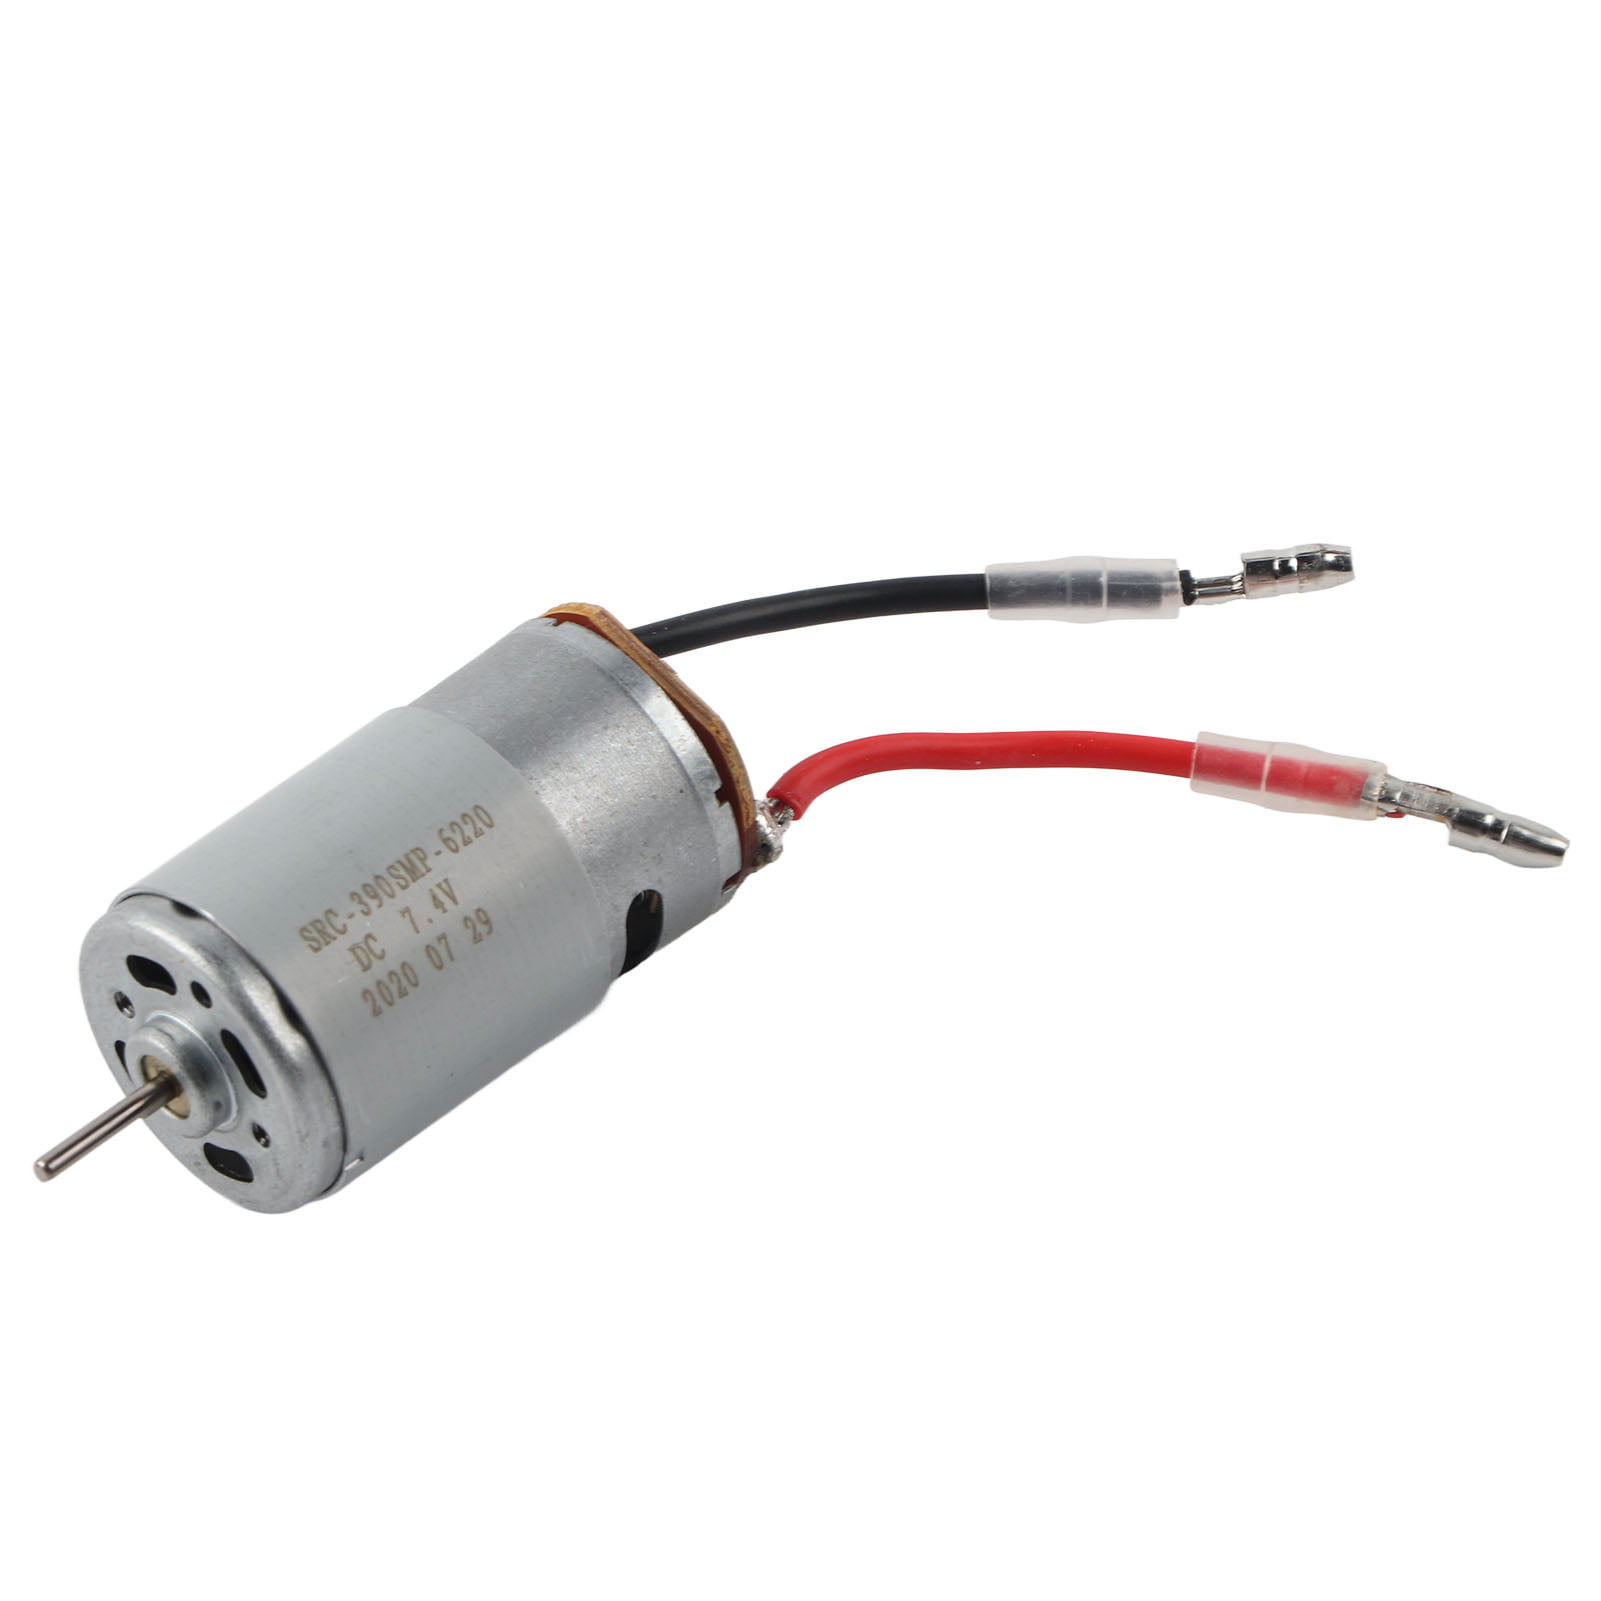 390 Series Electric Brushed Motor 03012 For 1/16 1/18 RC Hobby Model Car 